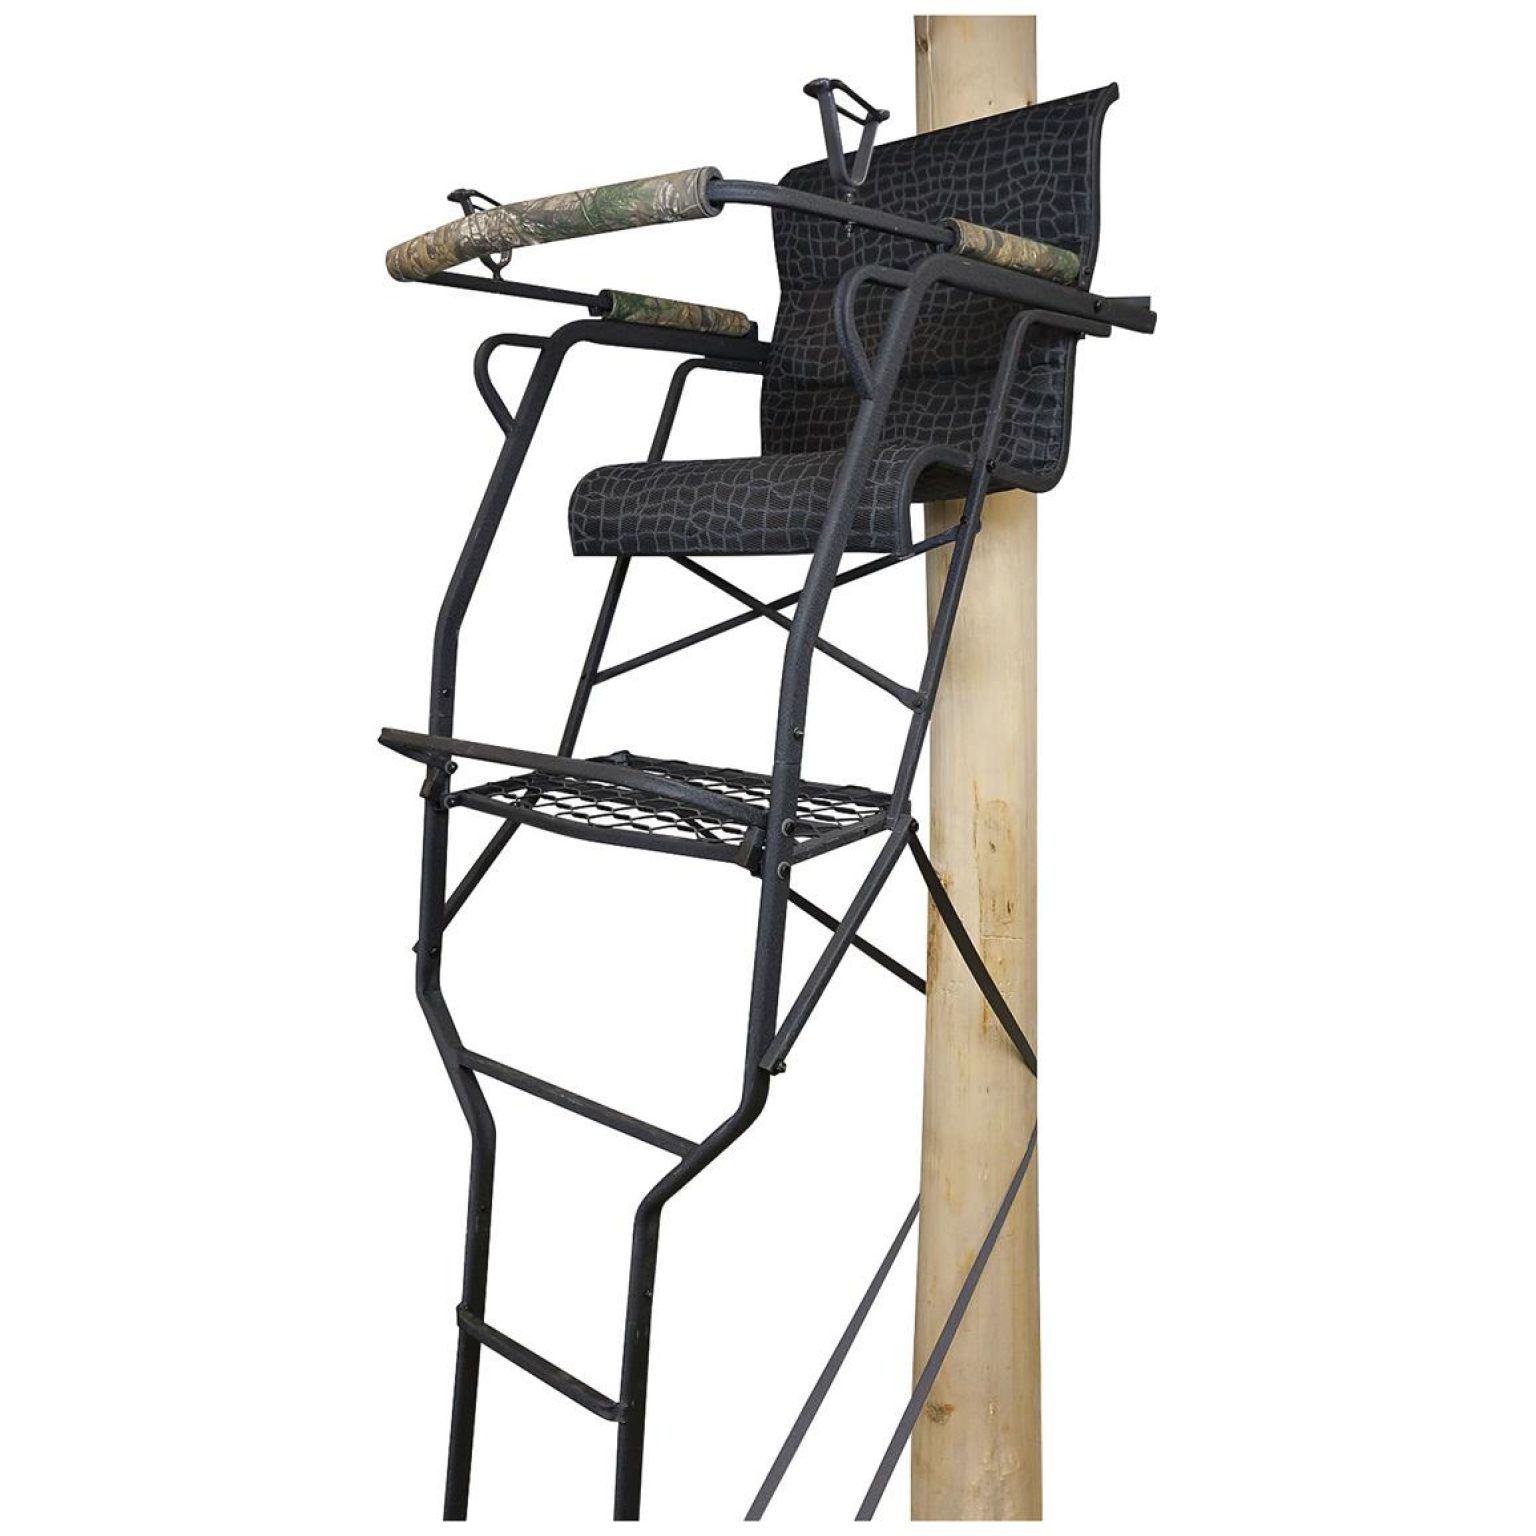 heavy duty ladder stands for hunting